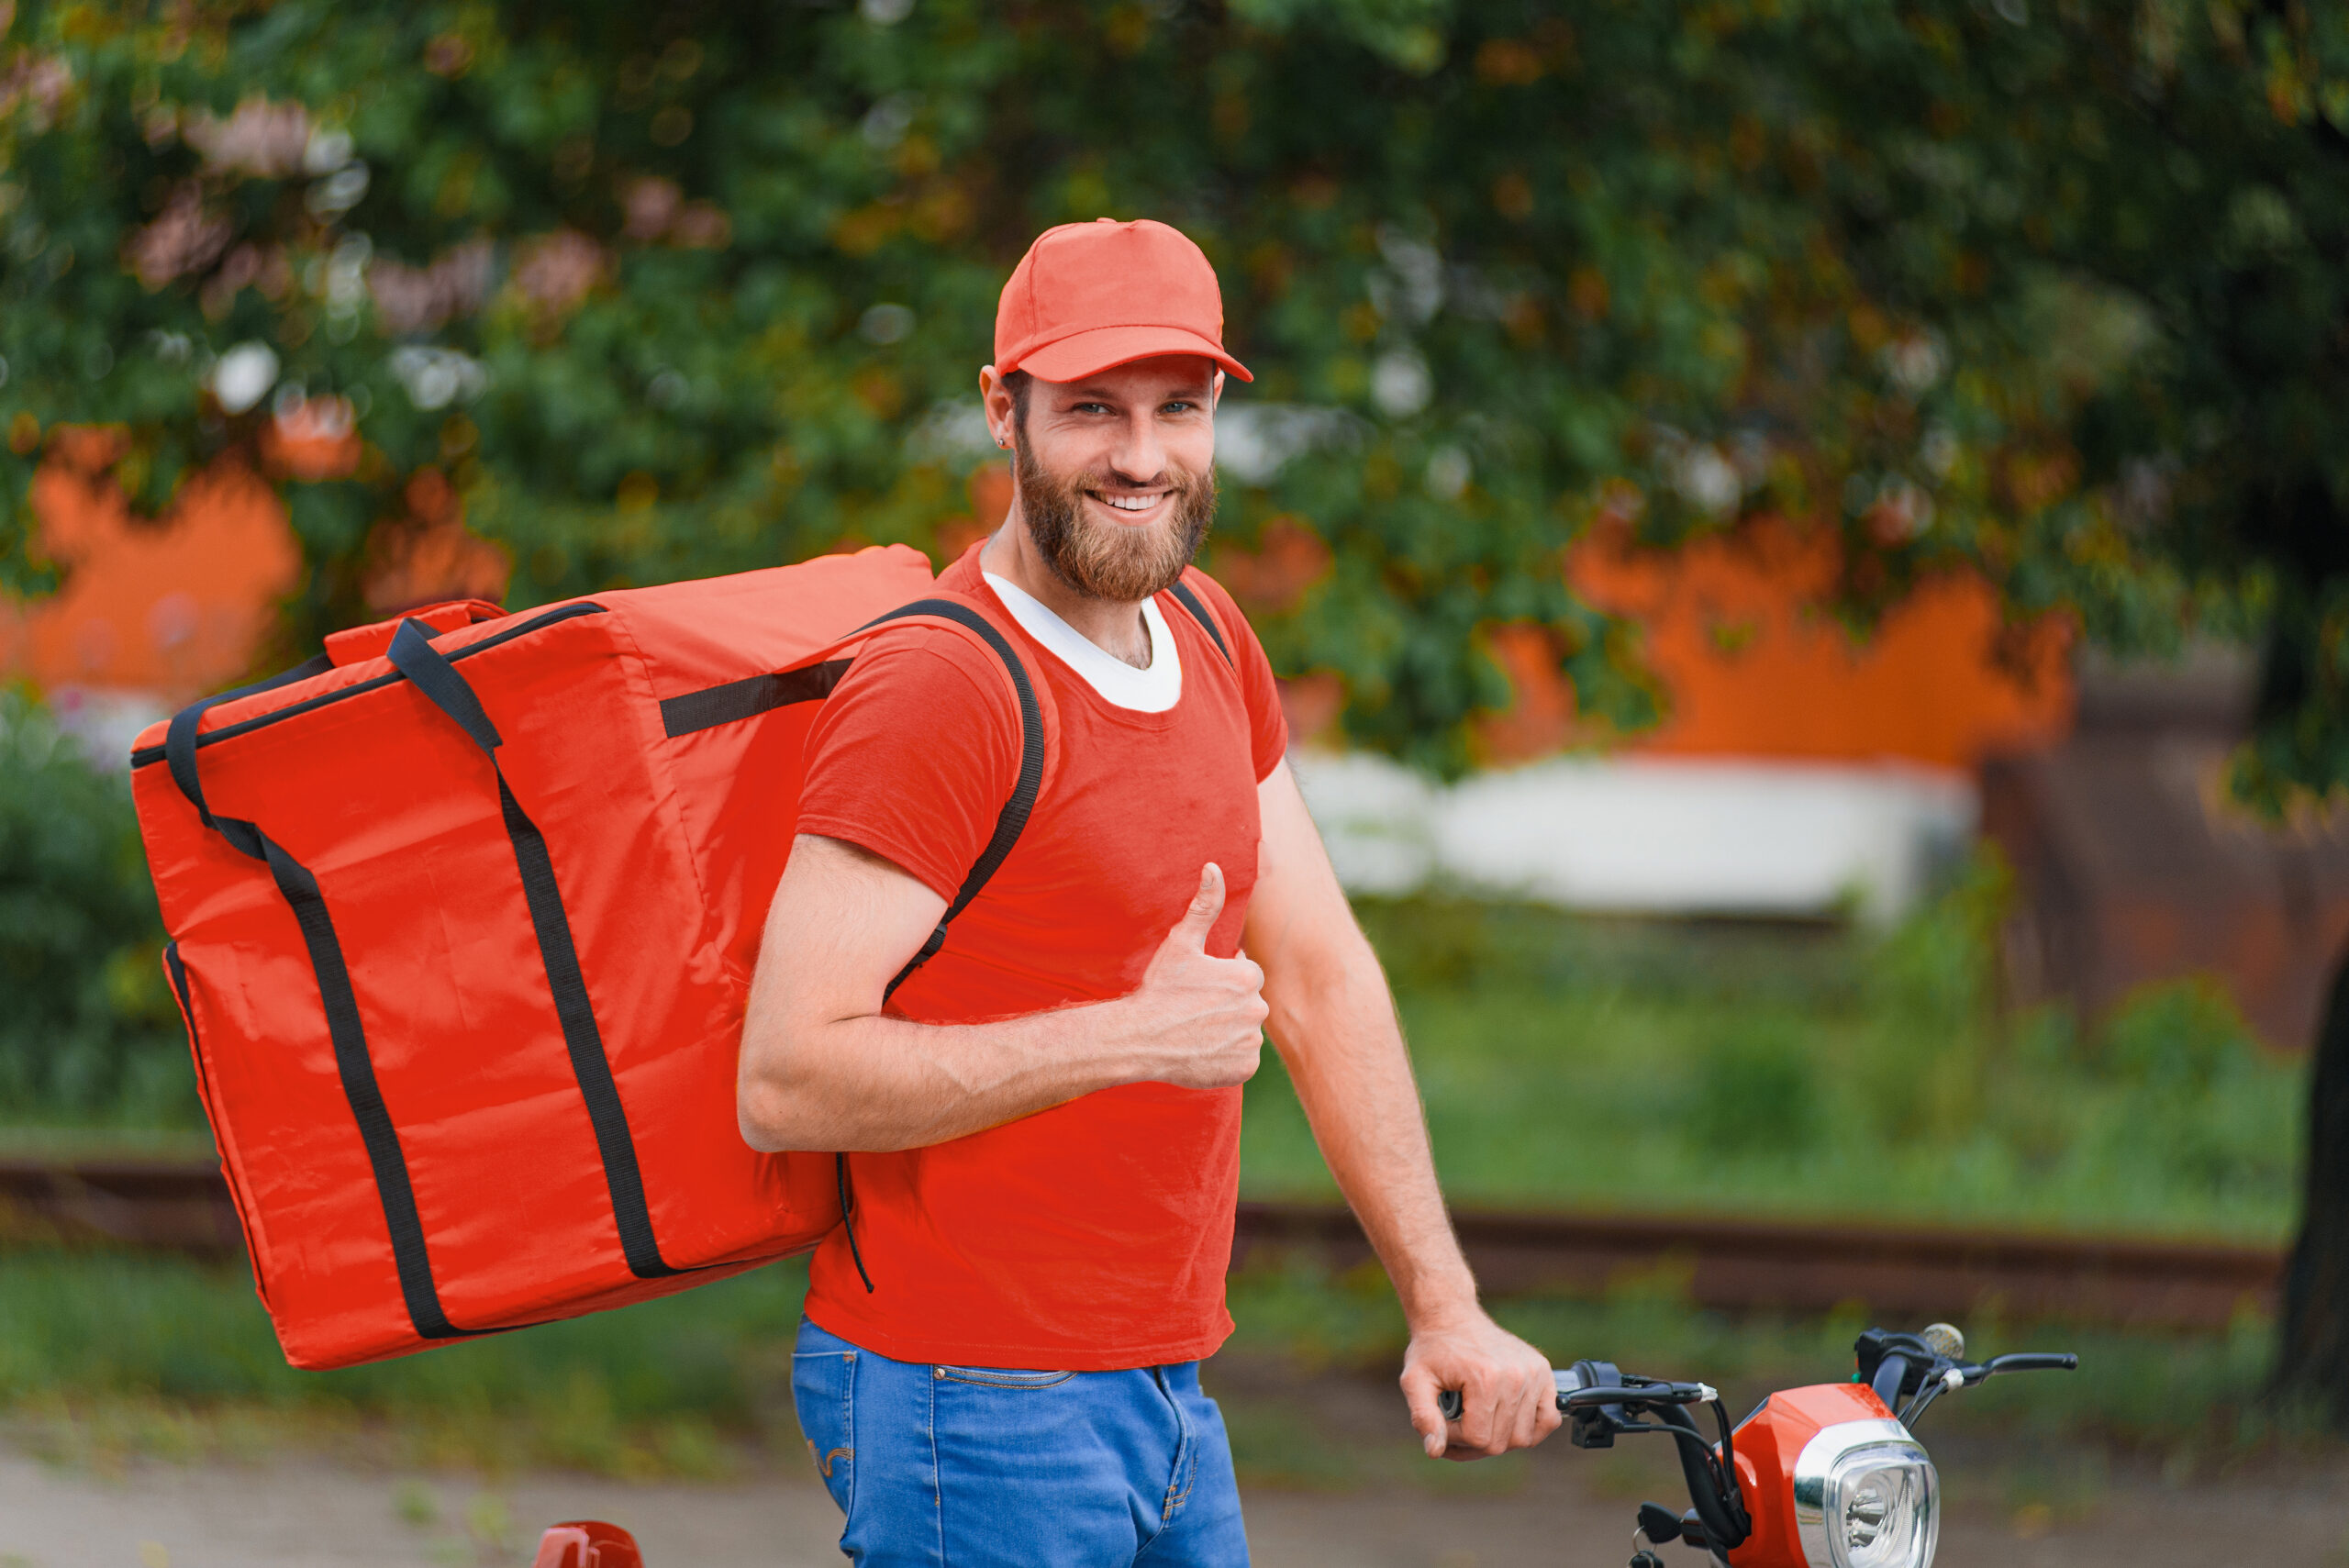 Food delivery man in red uniform with food delivery bag on his back smiling and showing thumb up